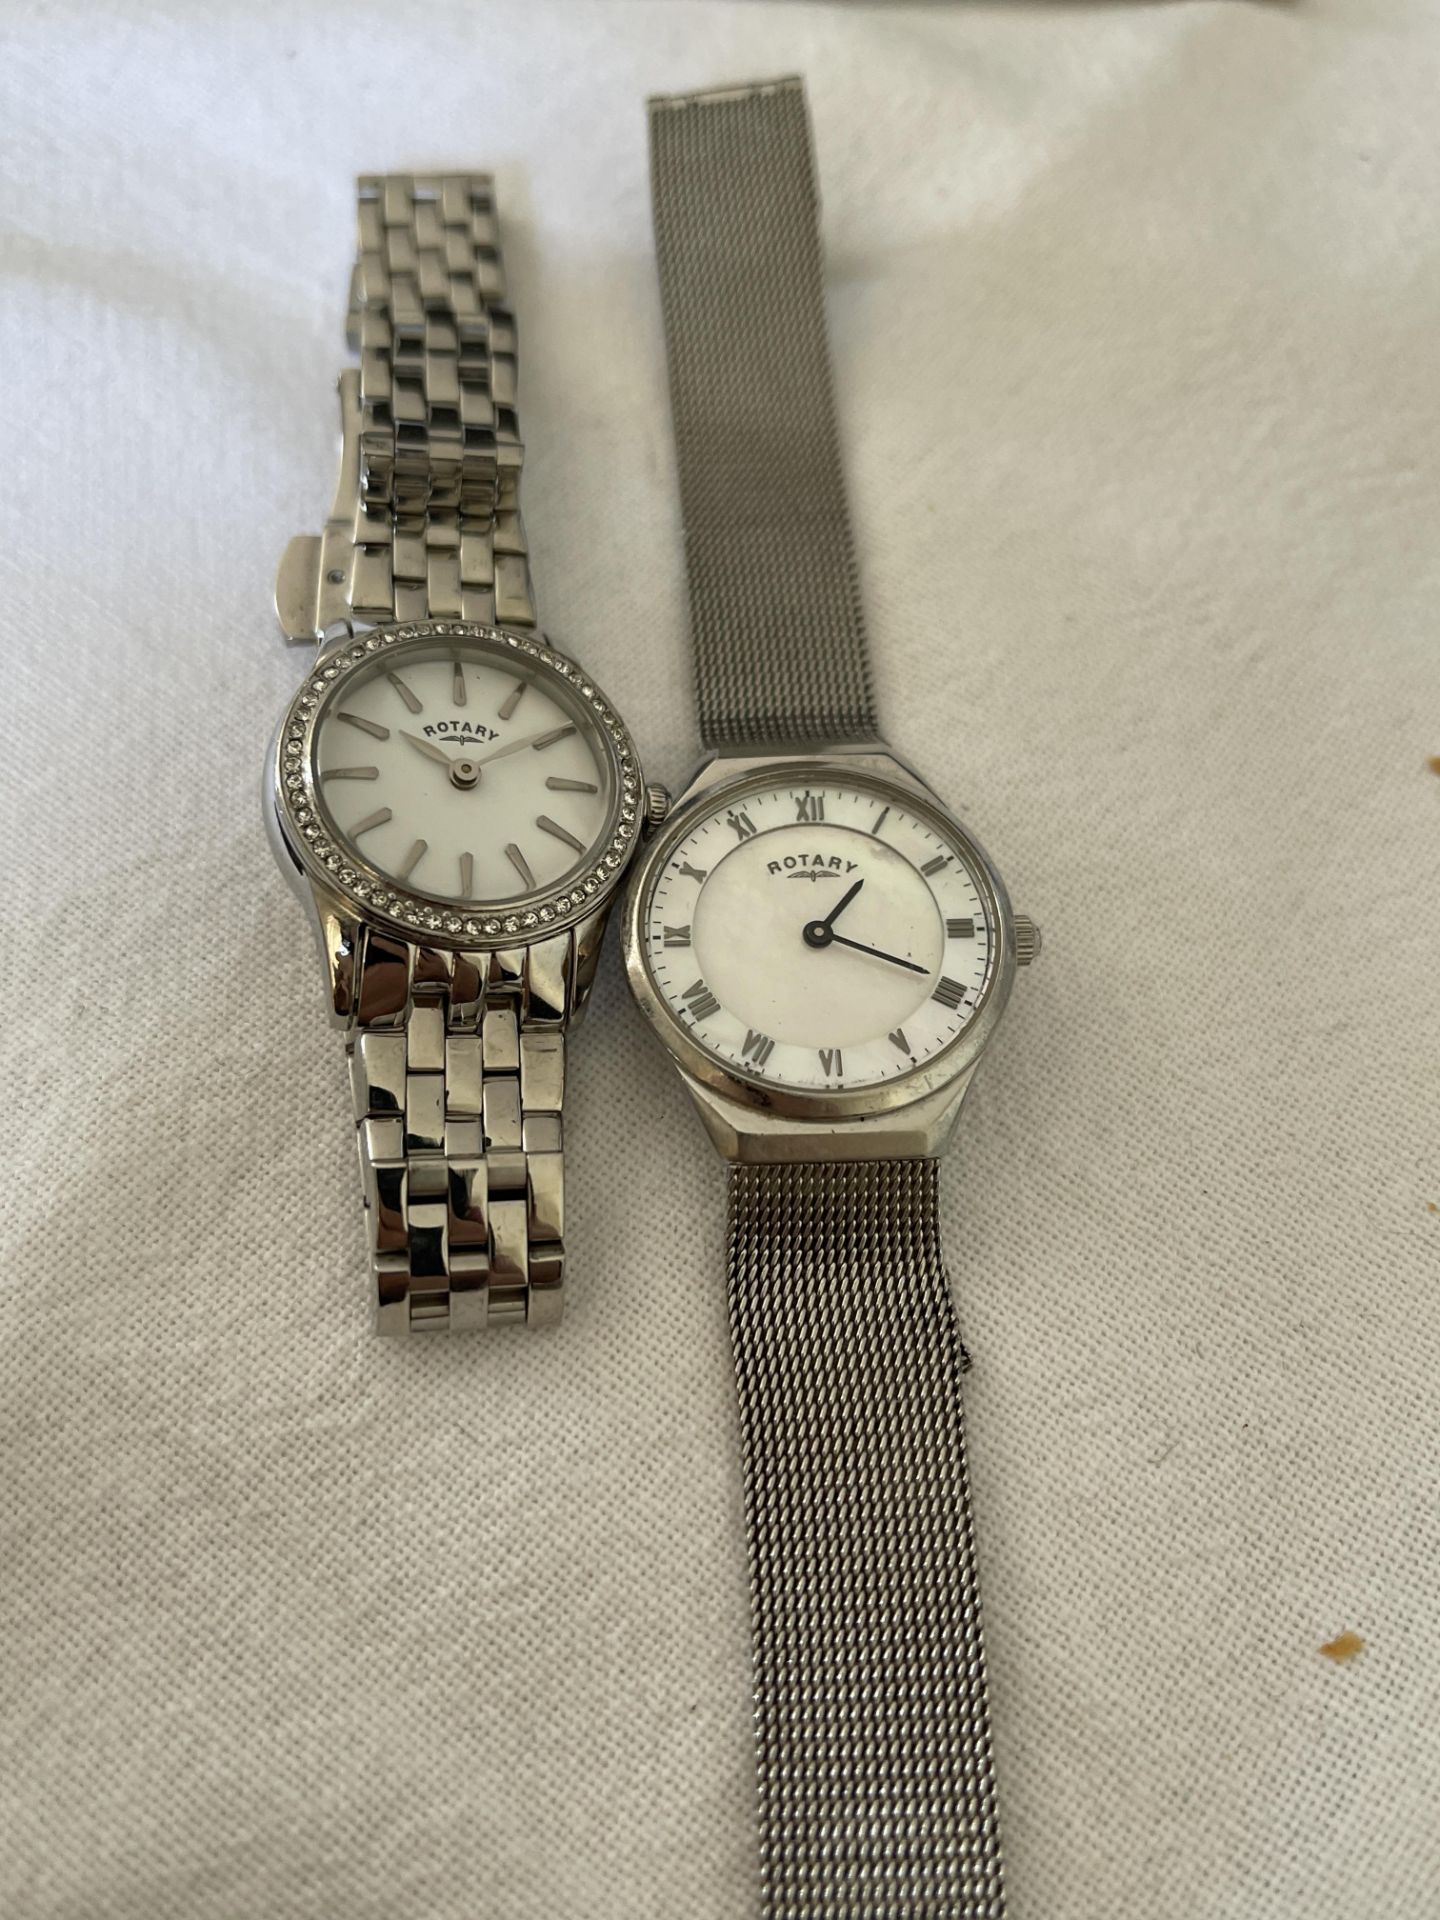 Rotary watches returned watch from a main agent.